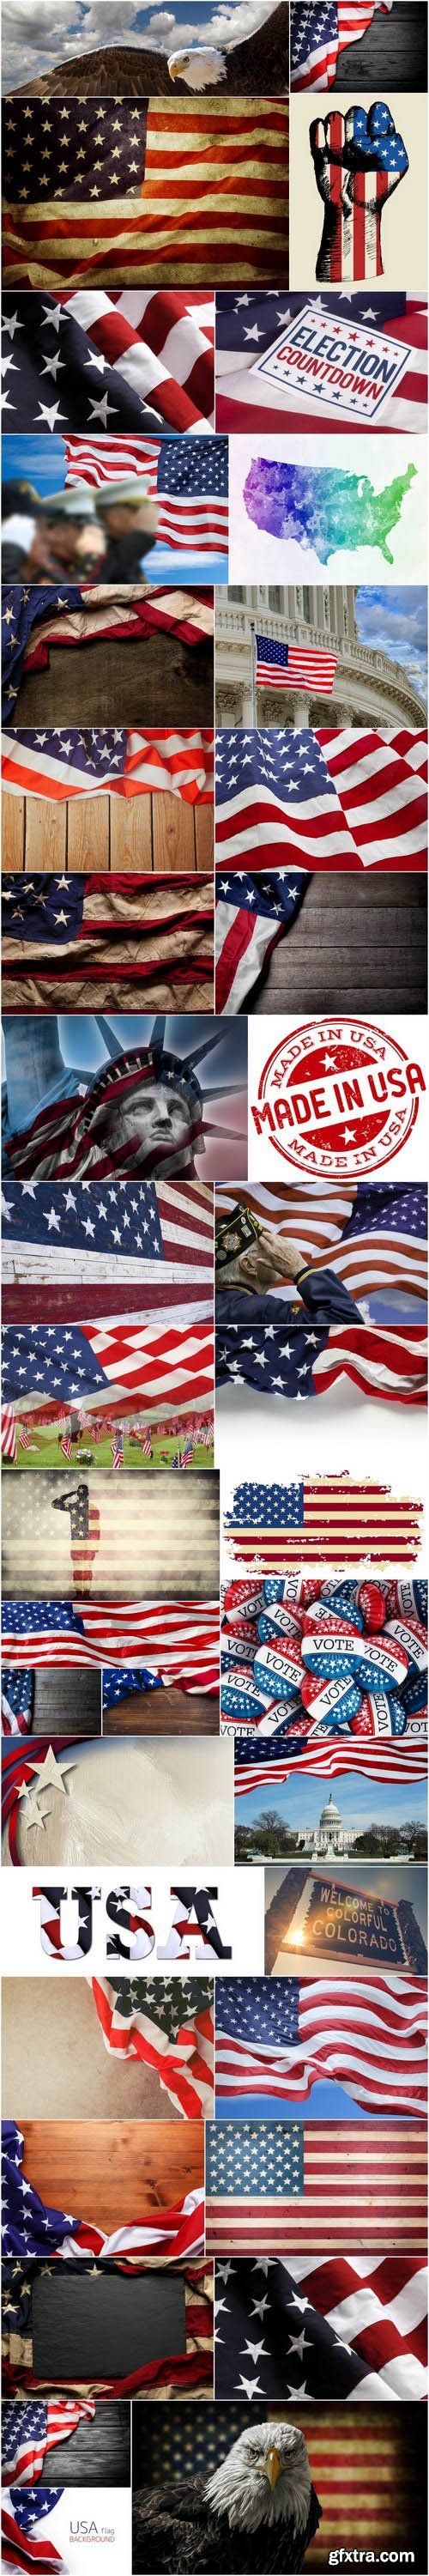 U.S. Style - American Patriot, Set of 39xUHQ JPEG Professional Stock Images